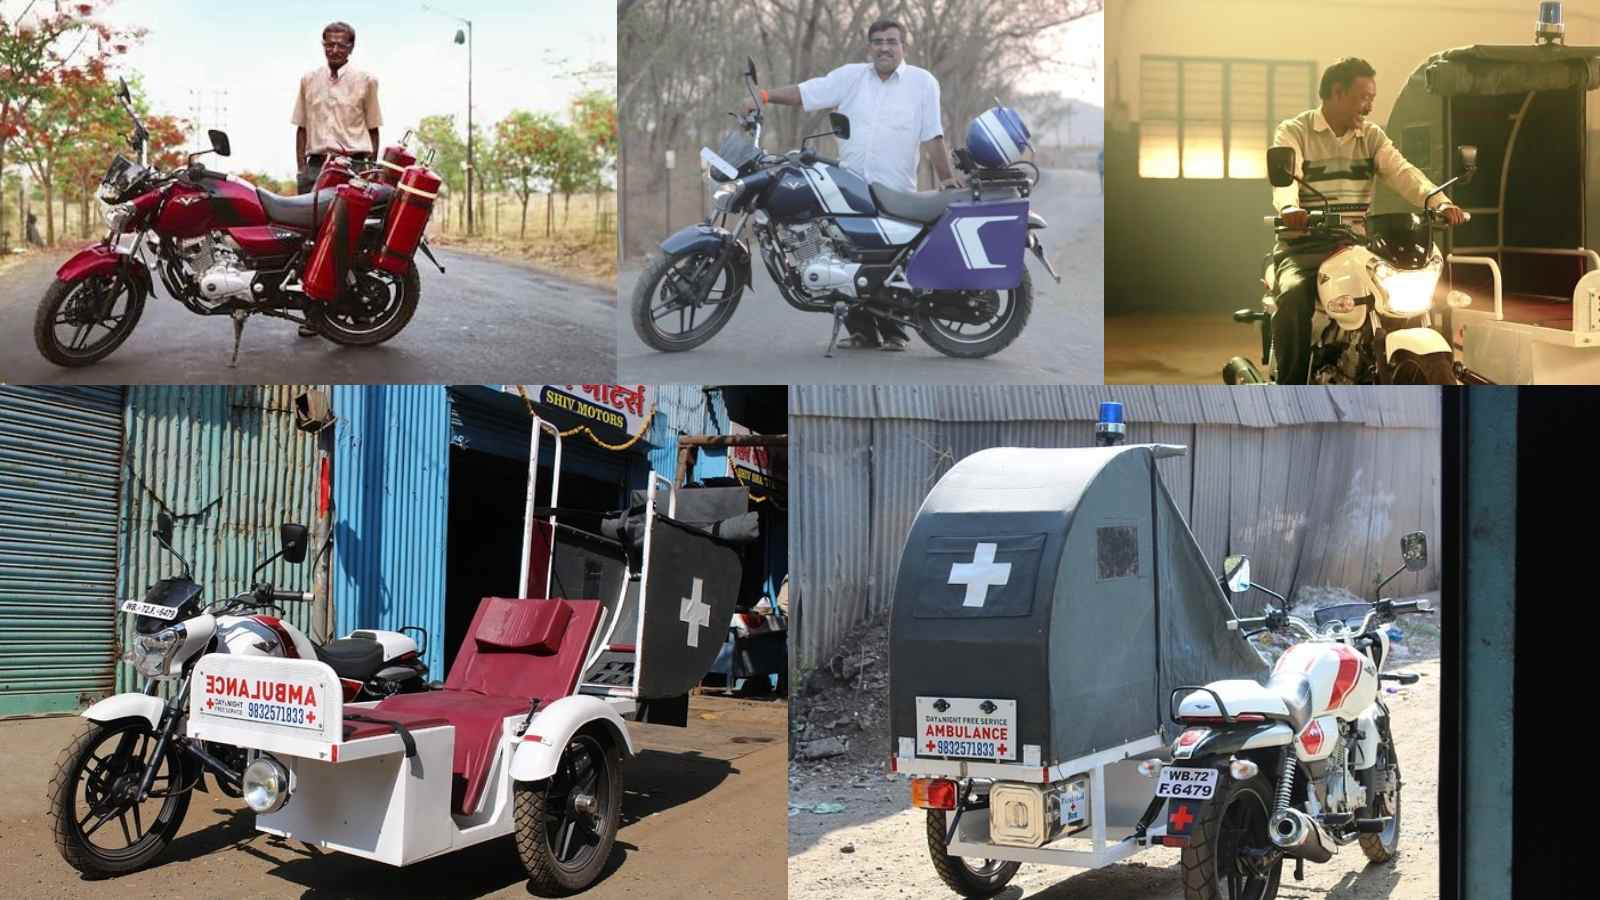 The Multifaceted Bajaj V15 Plays The Role Of An Ambulance A